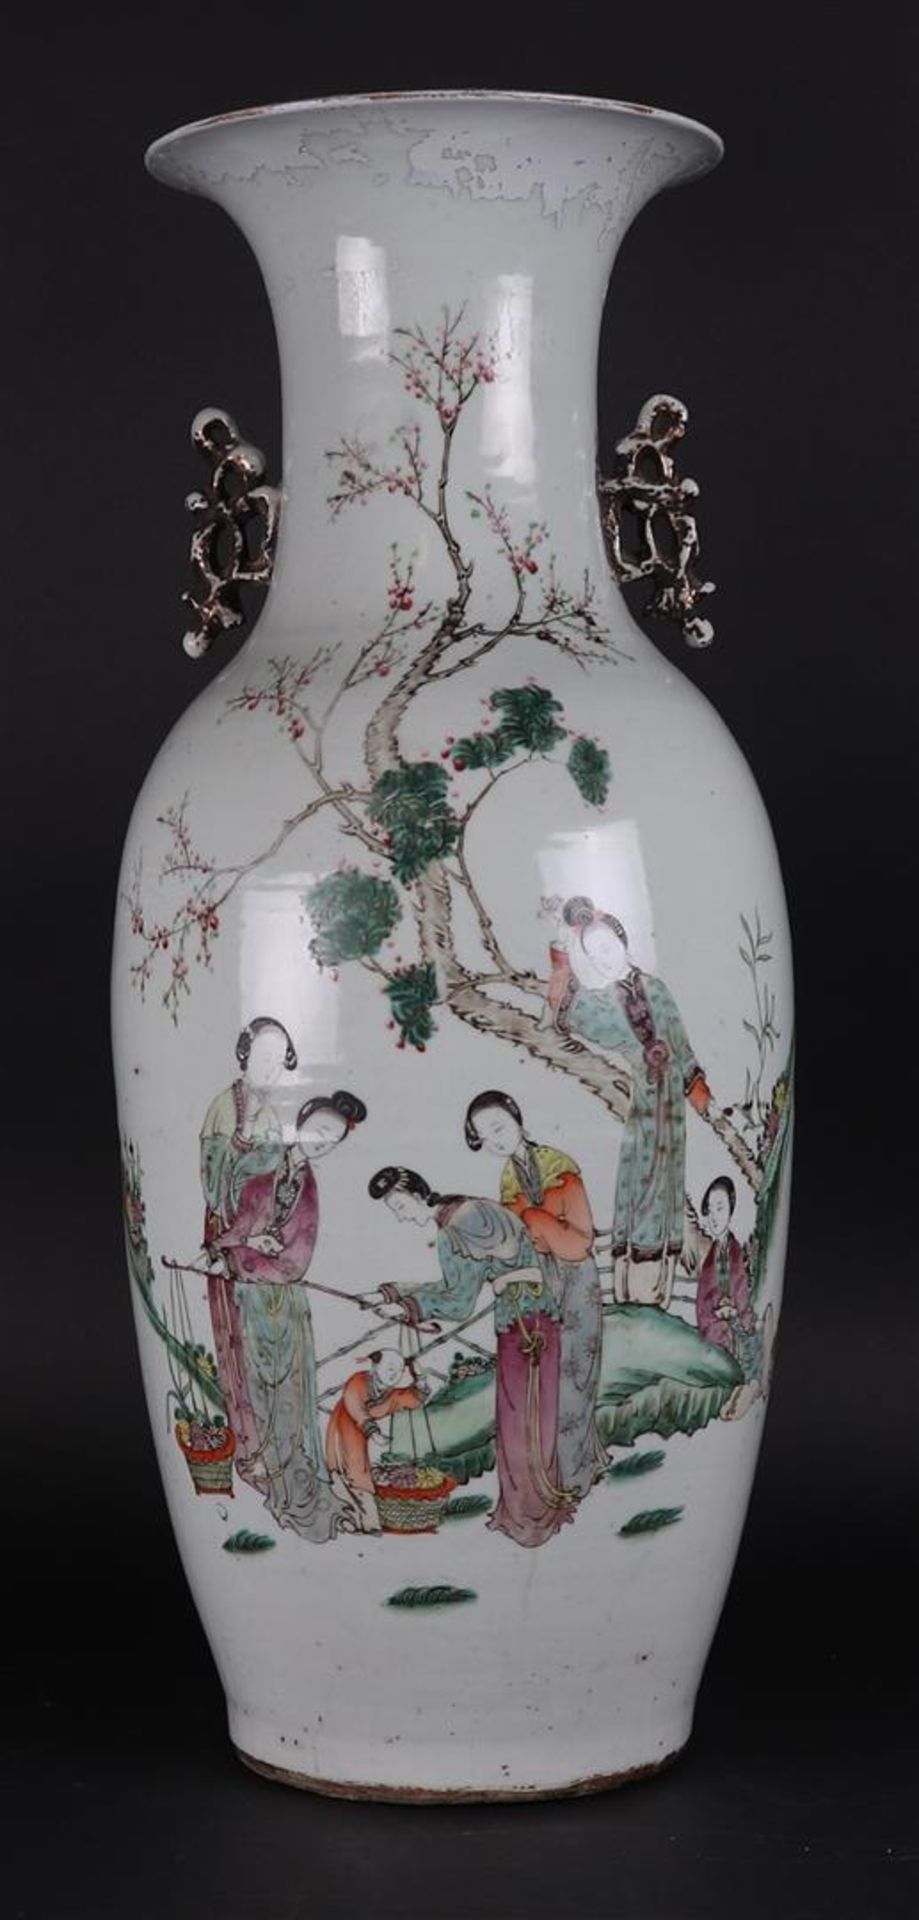 A porcelain Famille Rose vase decorated with various figures. China, 19th century.